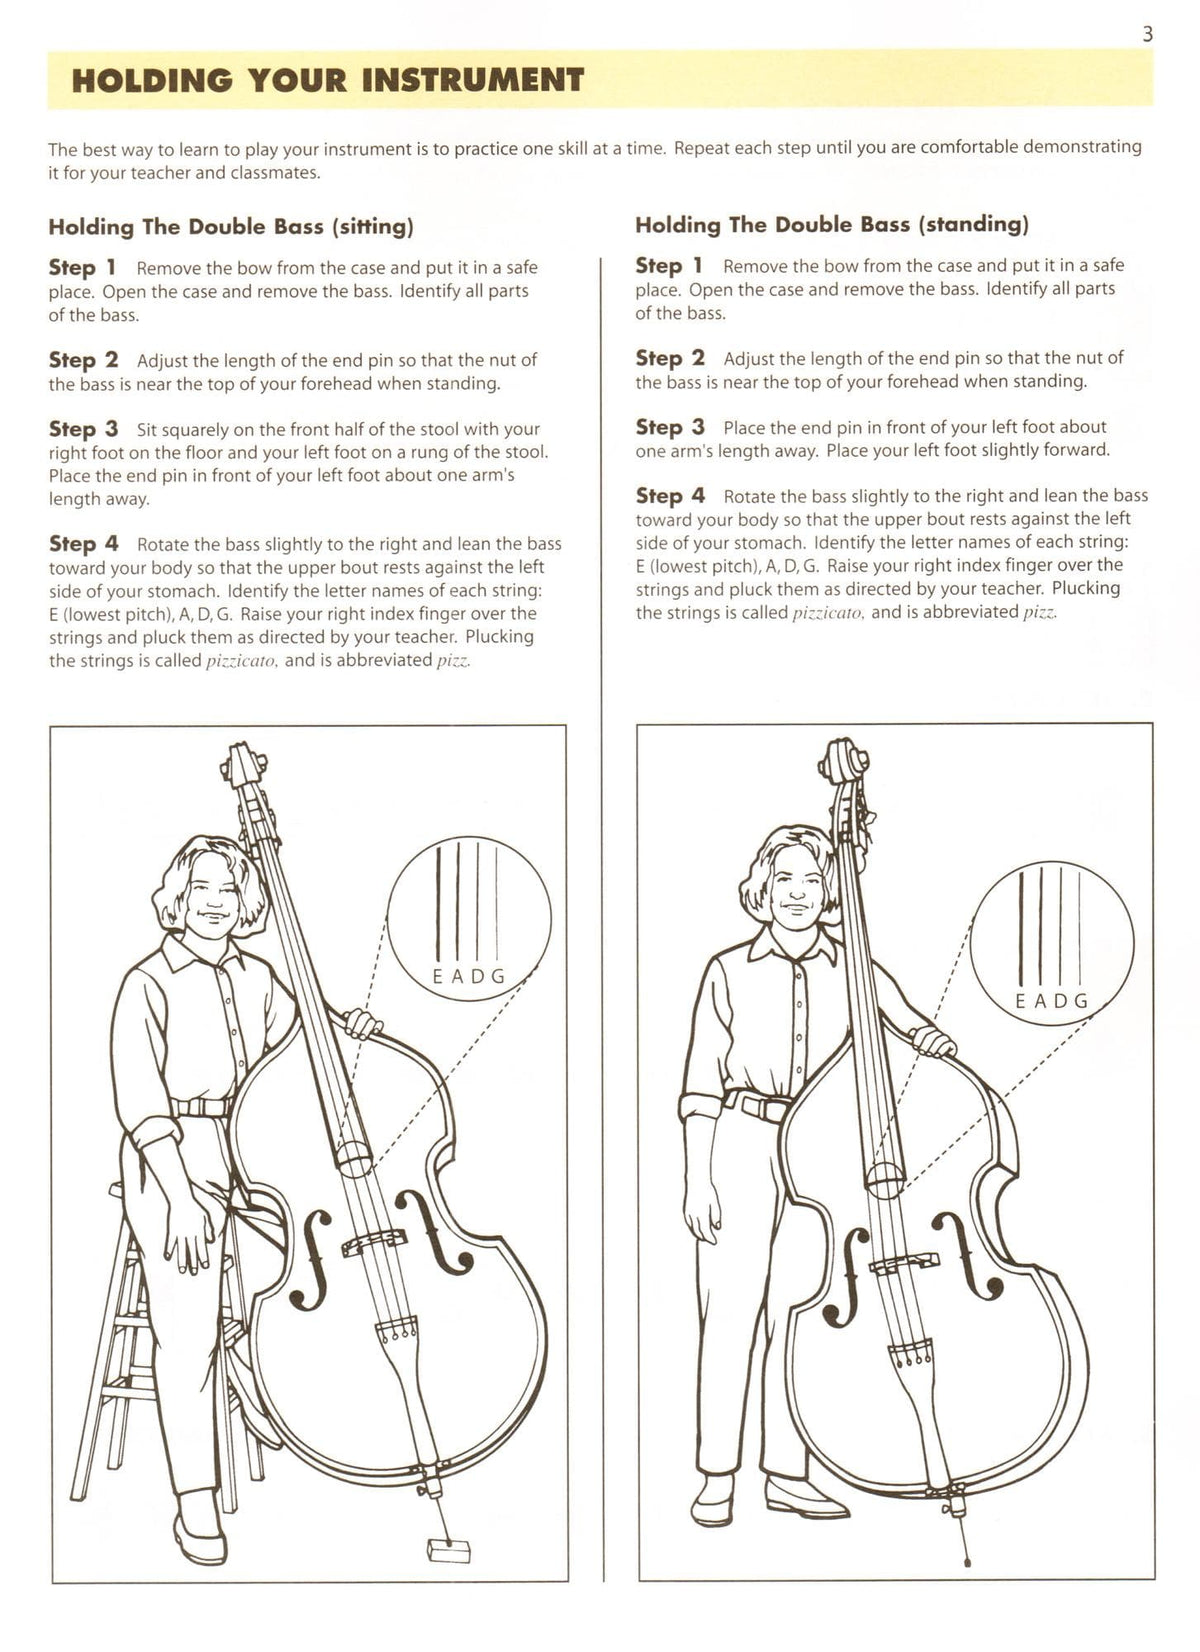 Essential Elements Interactive (formerly 2000) for Strings - Double Bass Book 1 - by Allen/Gillespie/Hayes - Hal Leonard Publication